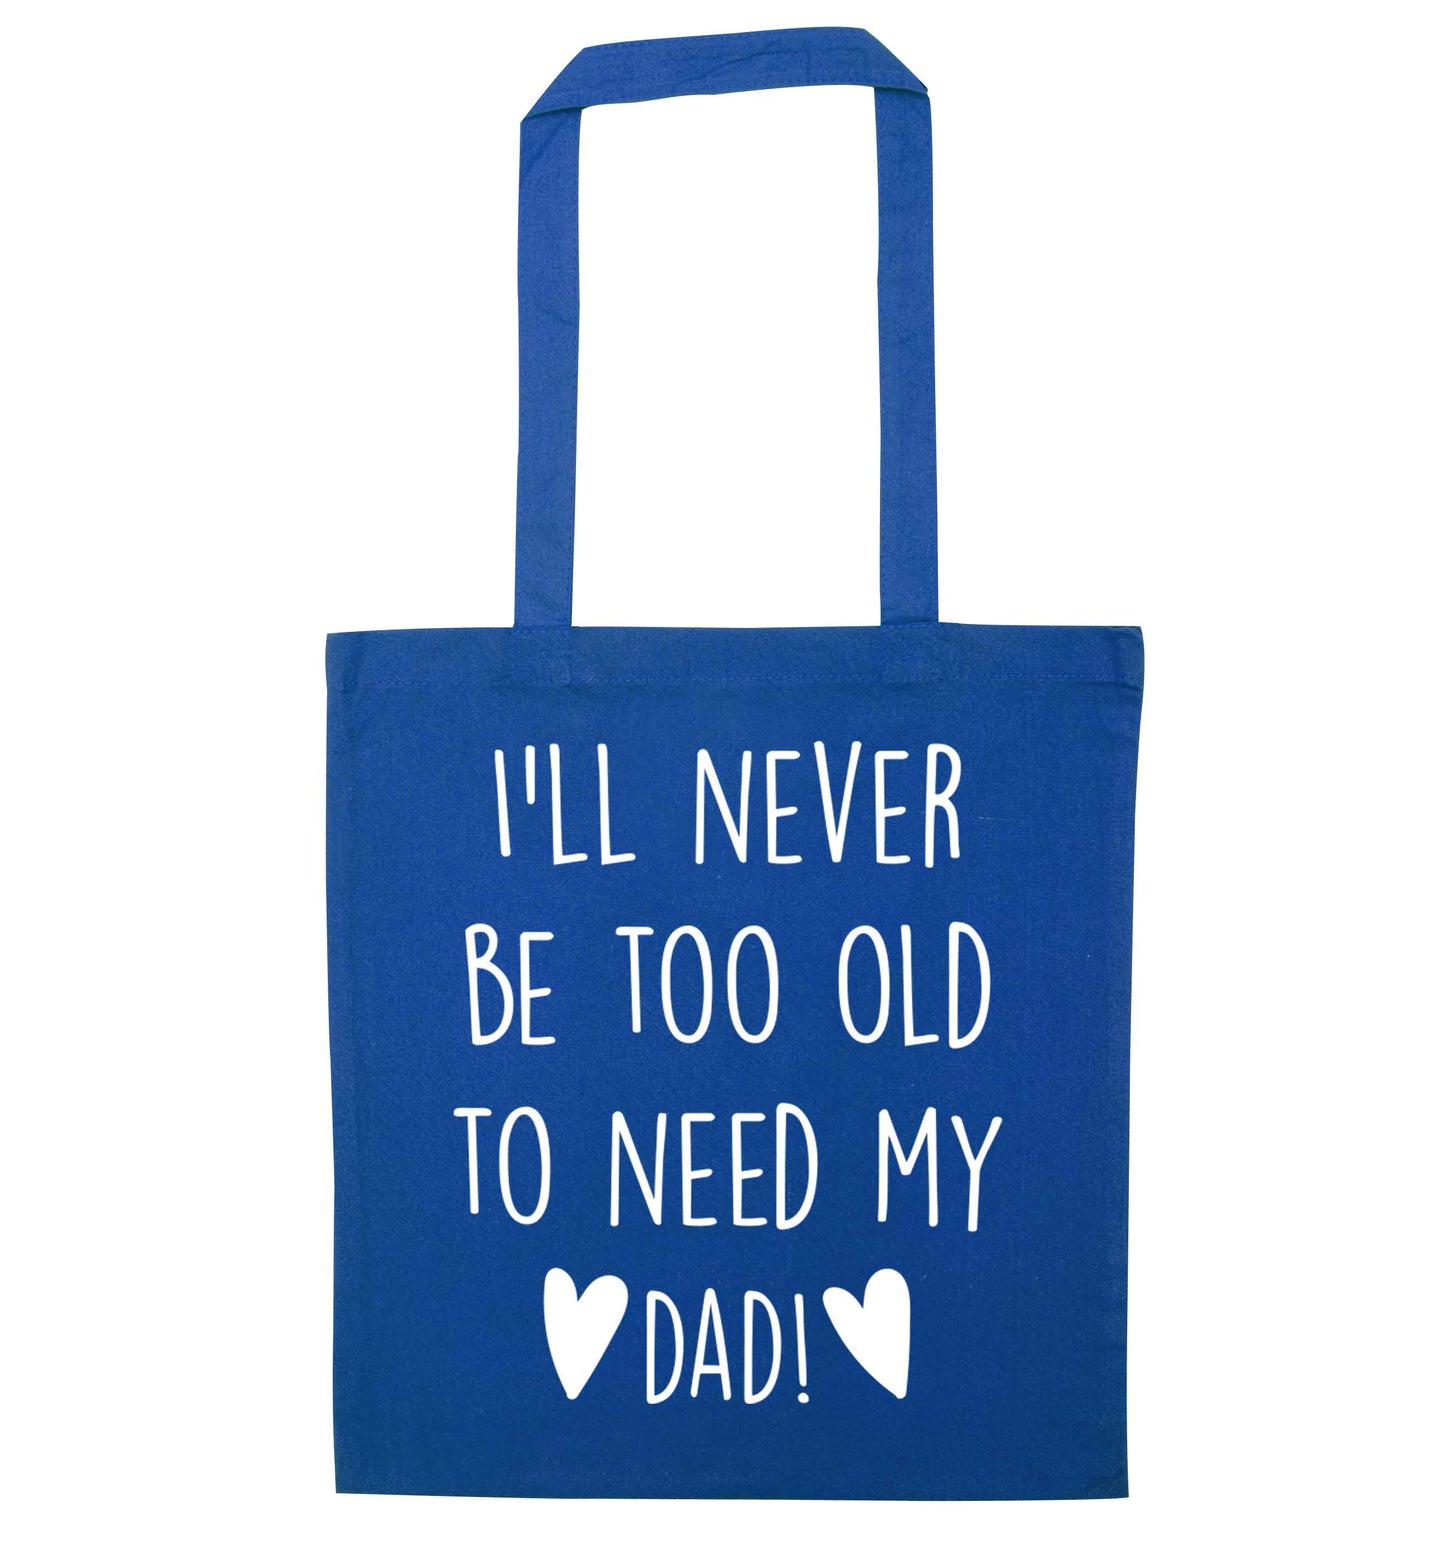 I'll never be too old to need my dad blue tote bag